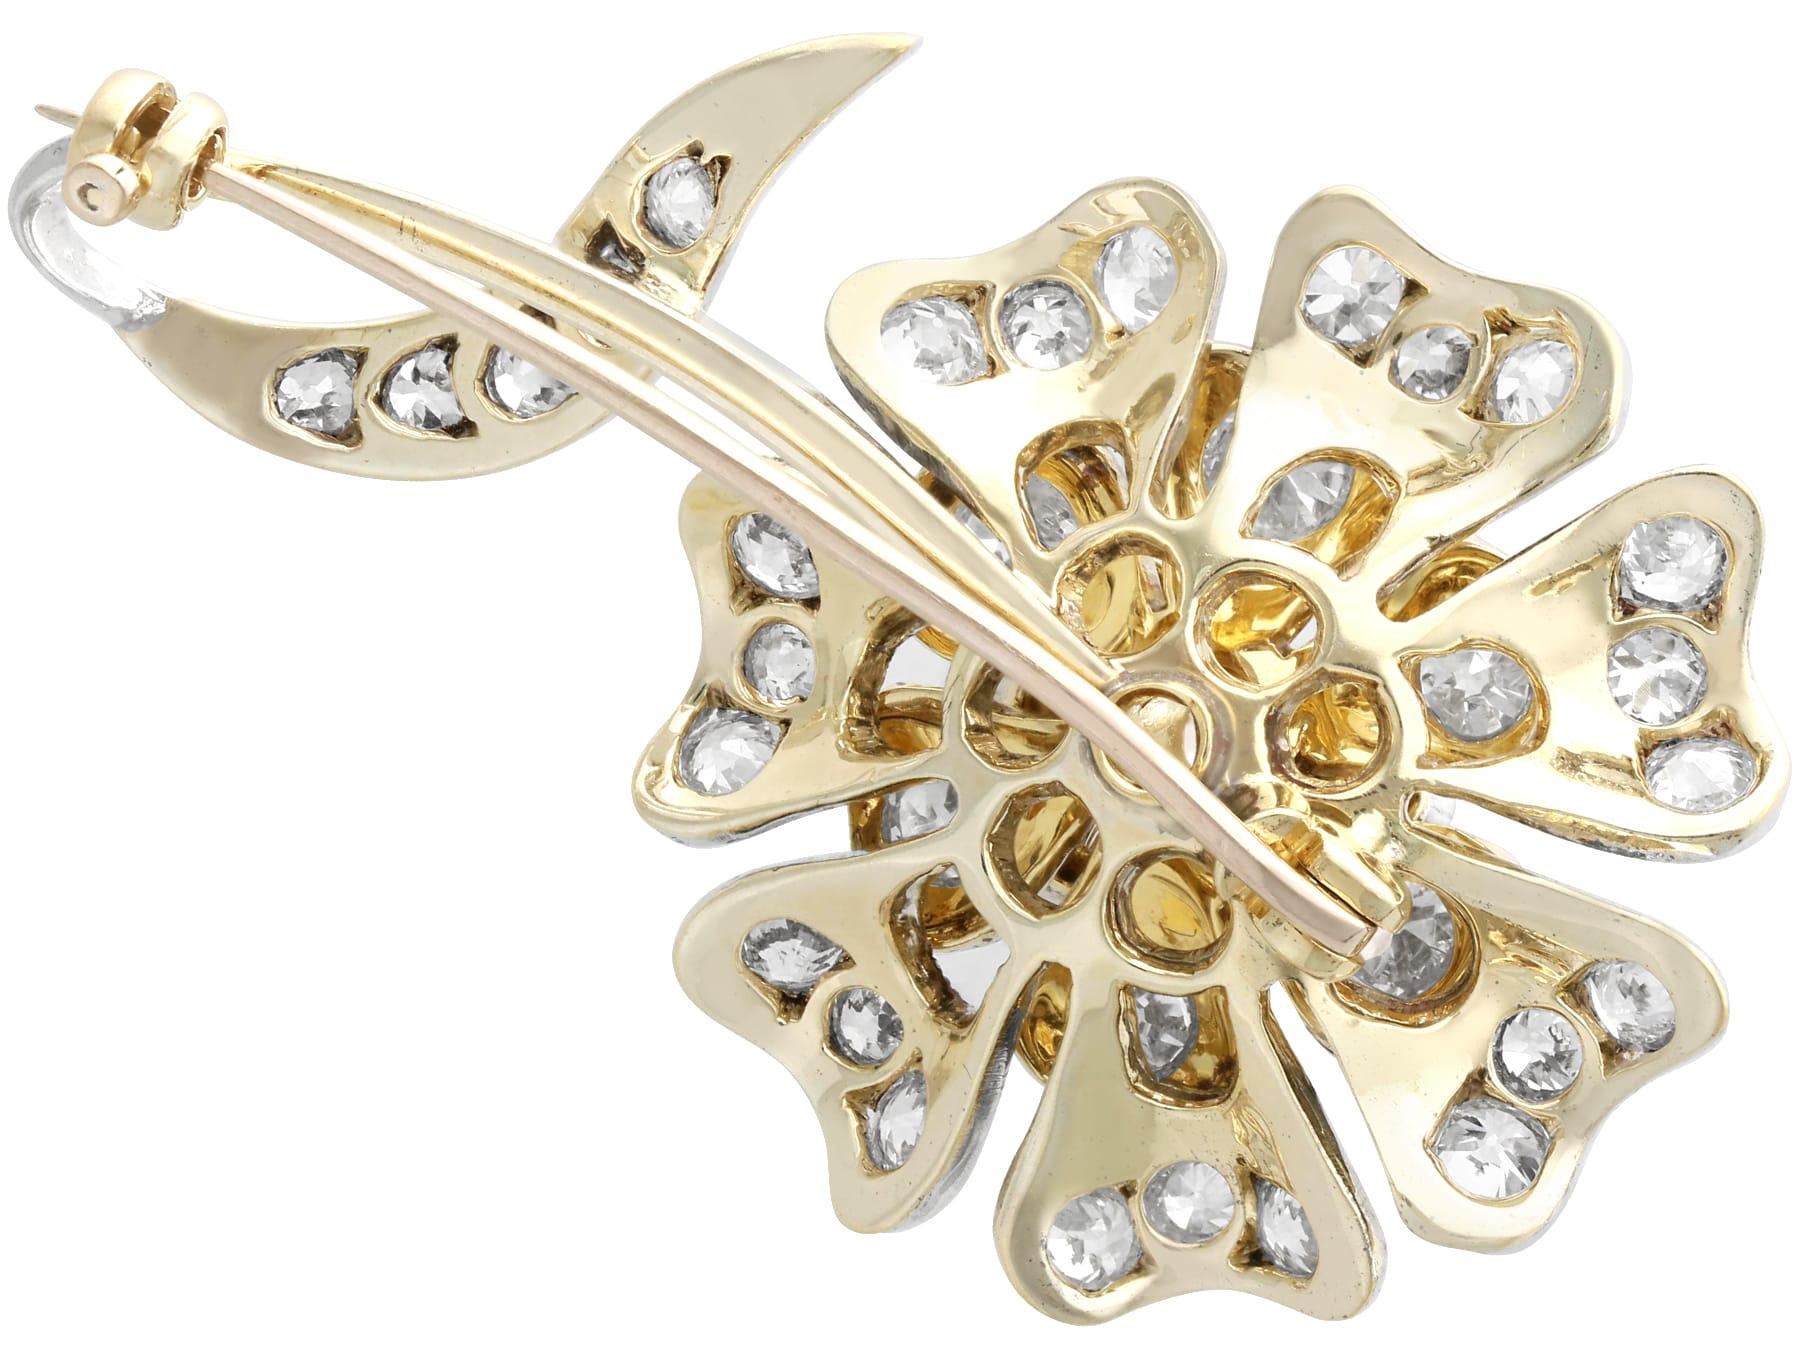 Women's or Men's Antique 4.59Ct Diamond and 15k Yellow Gold Floral Brooch Circa 1880 For Sale